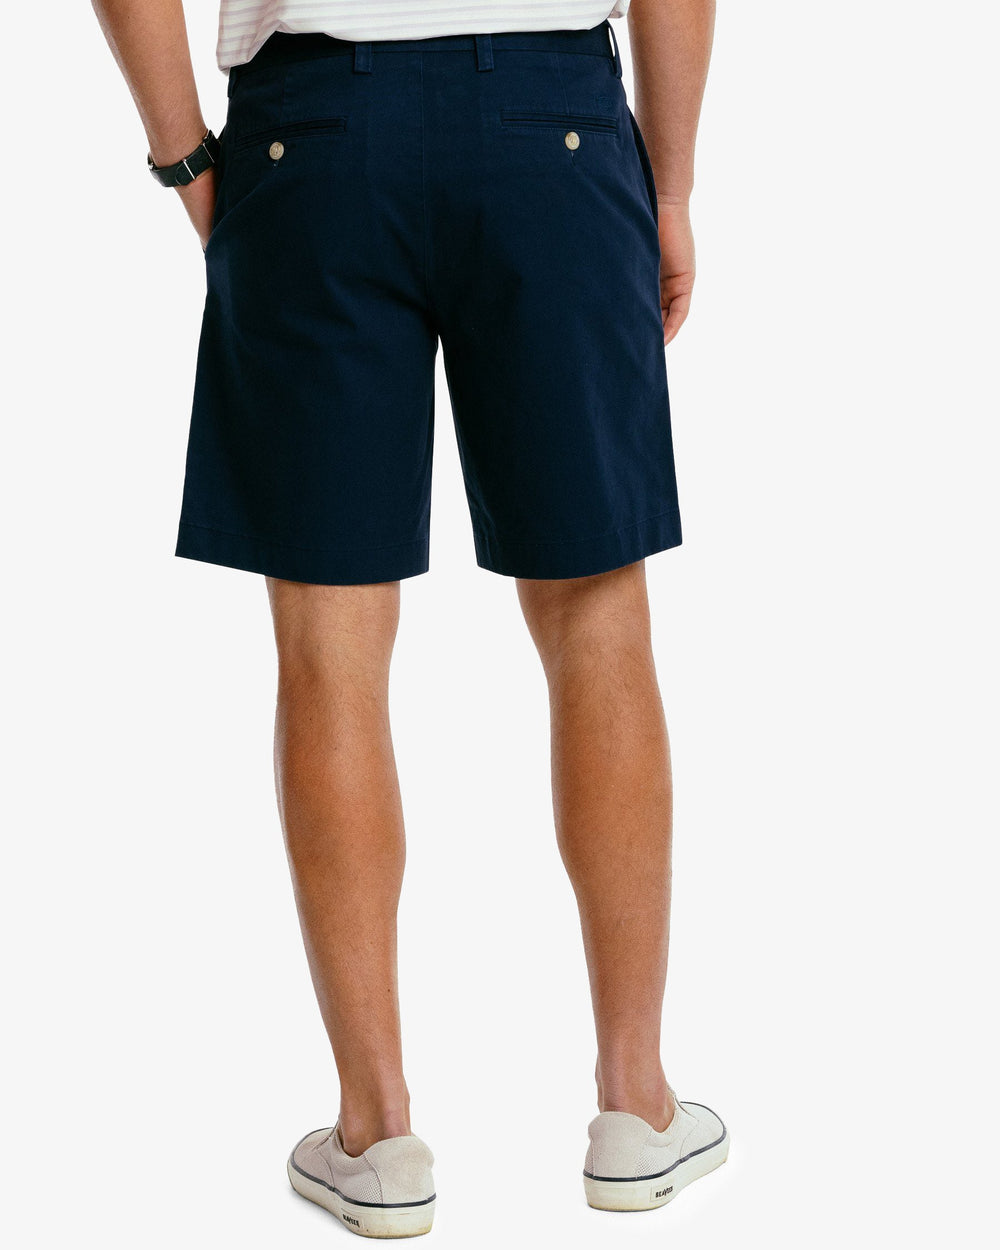 The back view of the Men's New Channel Marker 9 Inch Short by Southern Tide - True Navy